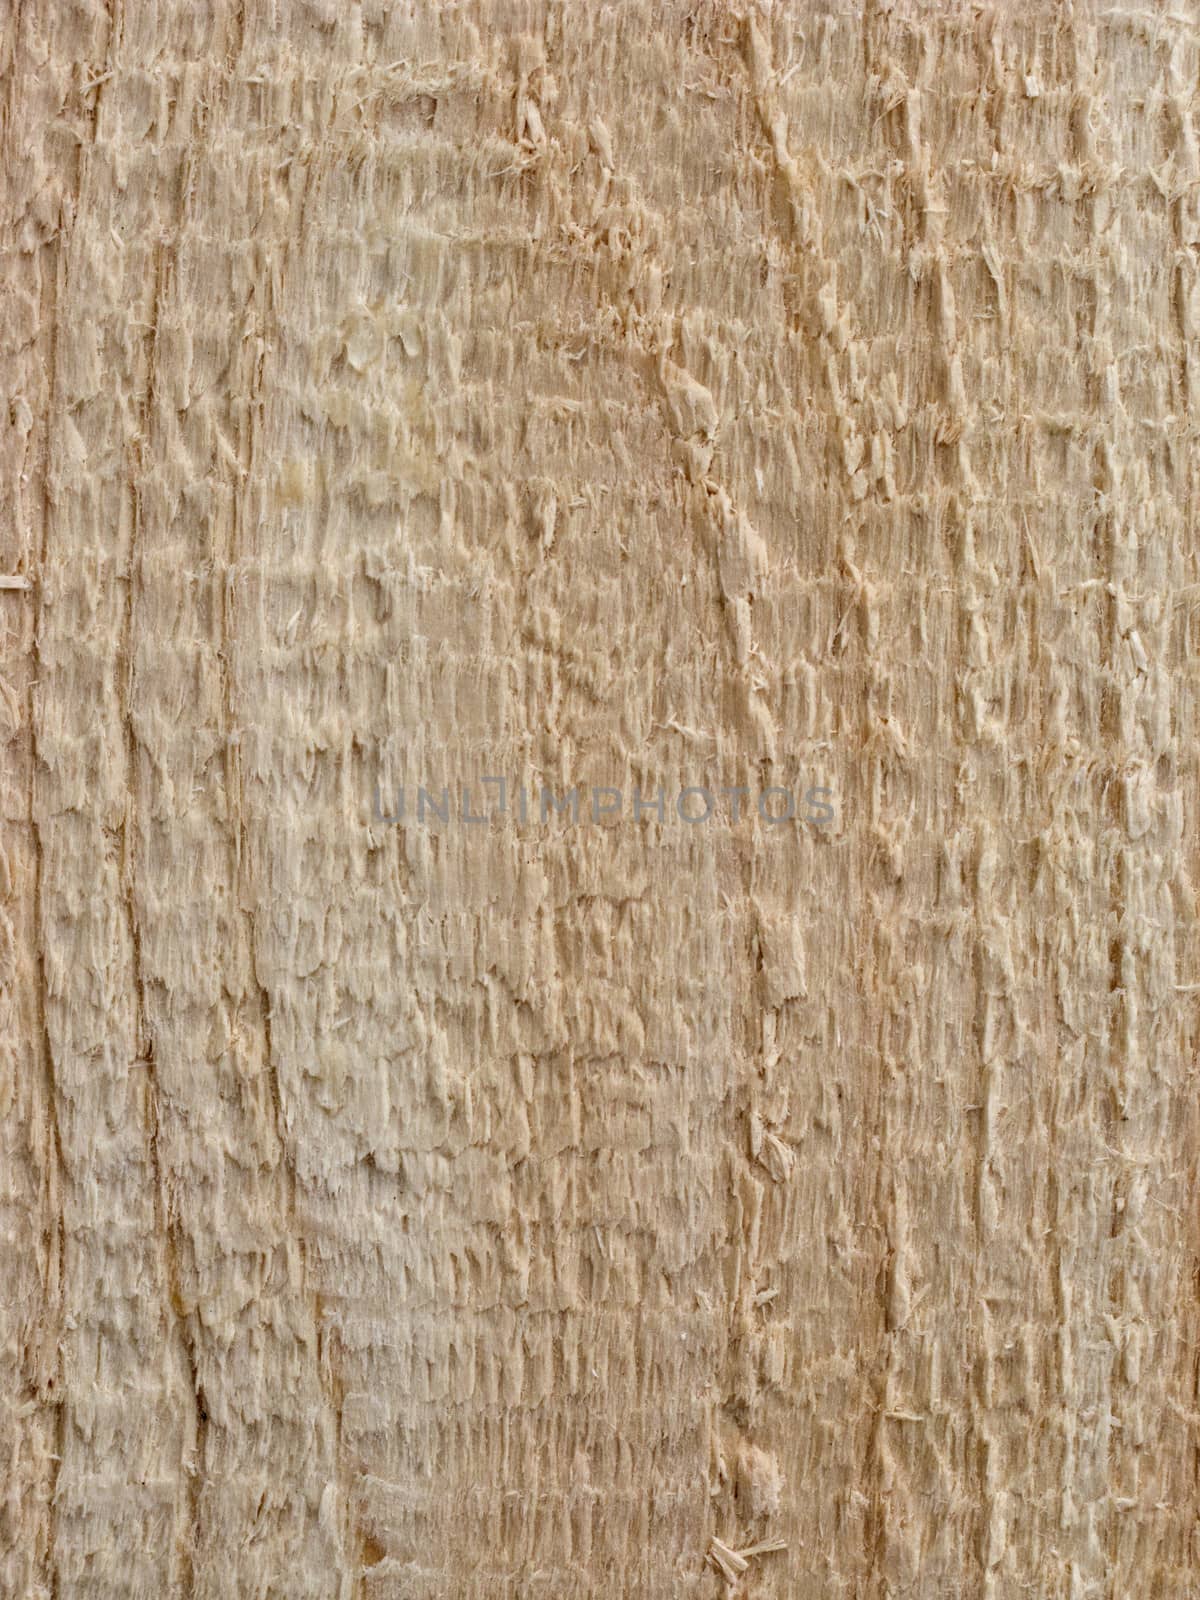 Wooden plank background by wander